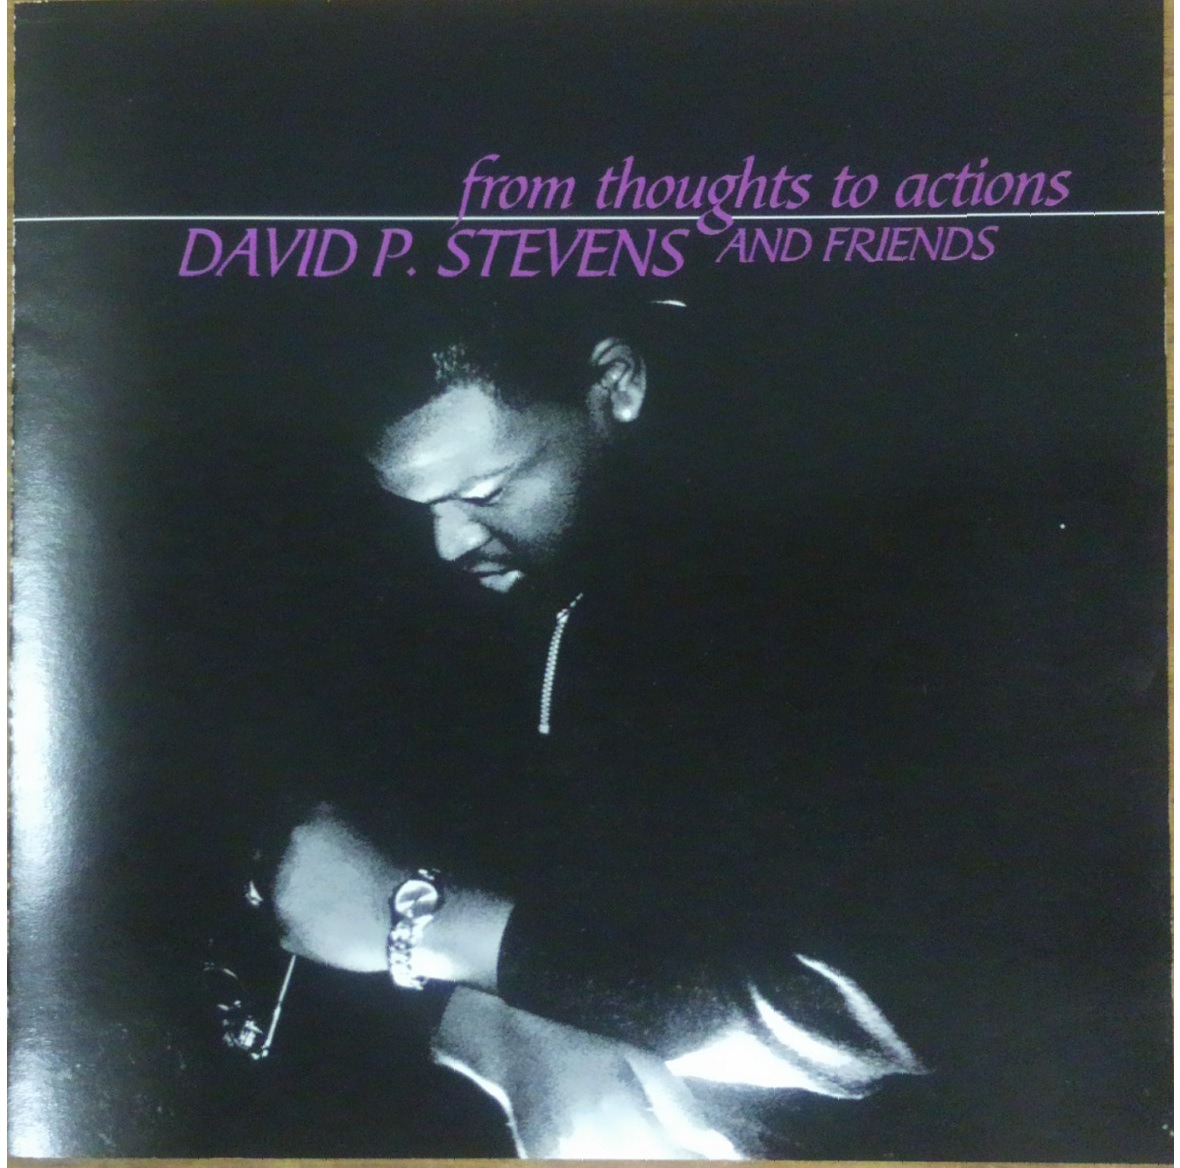 DAVID P. STEVENS / FROM THOUGHT TO ACTIONS